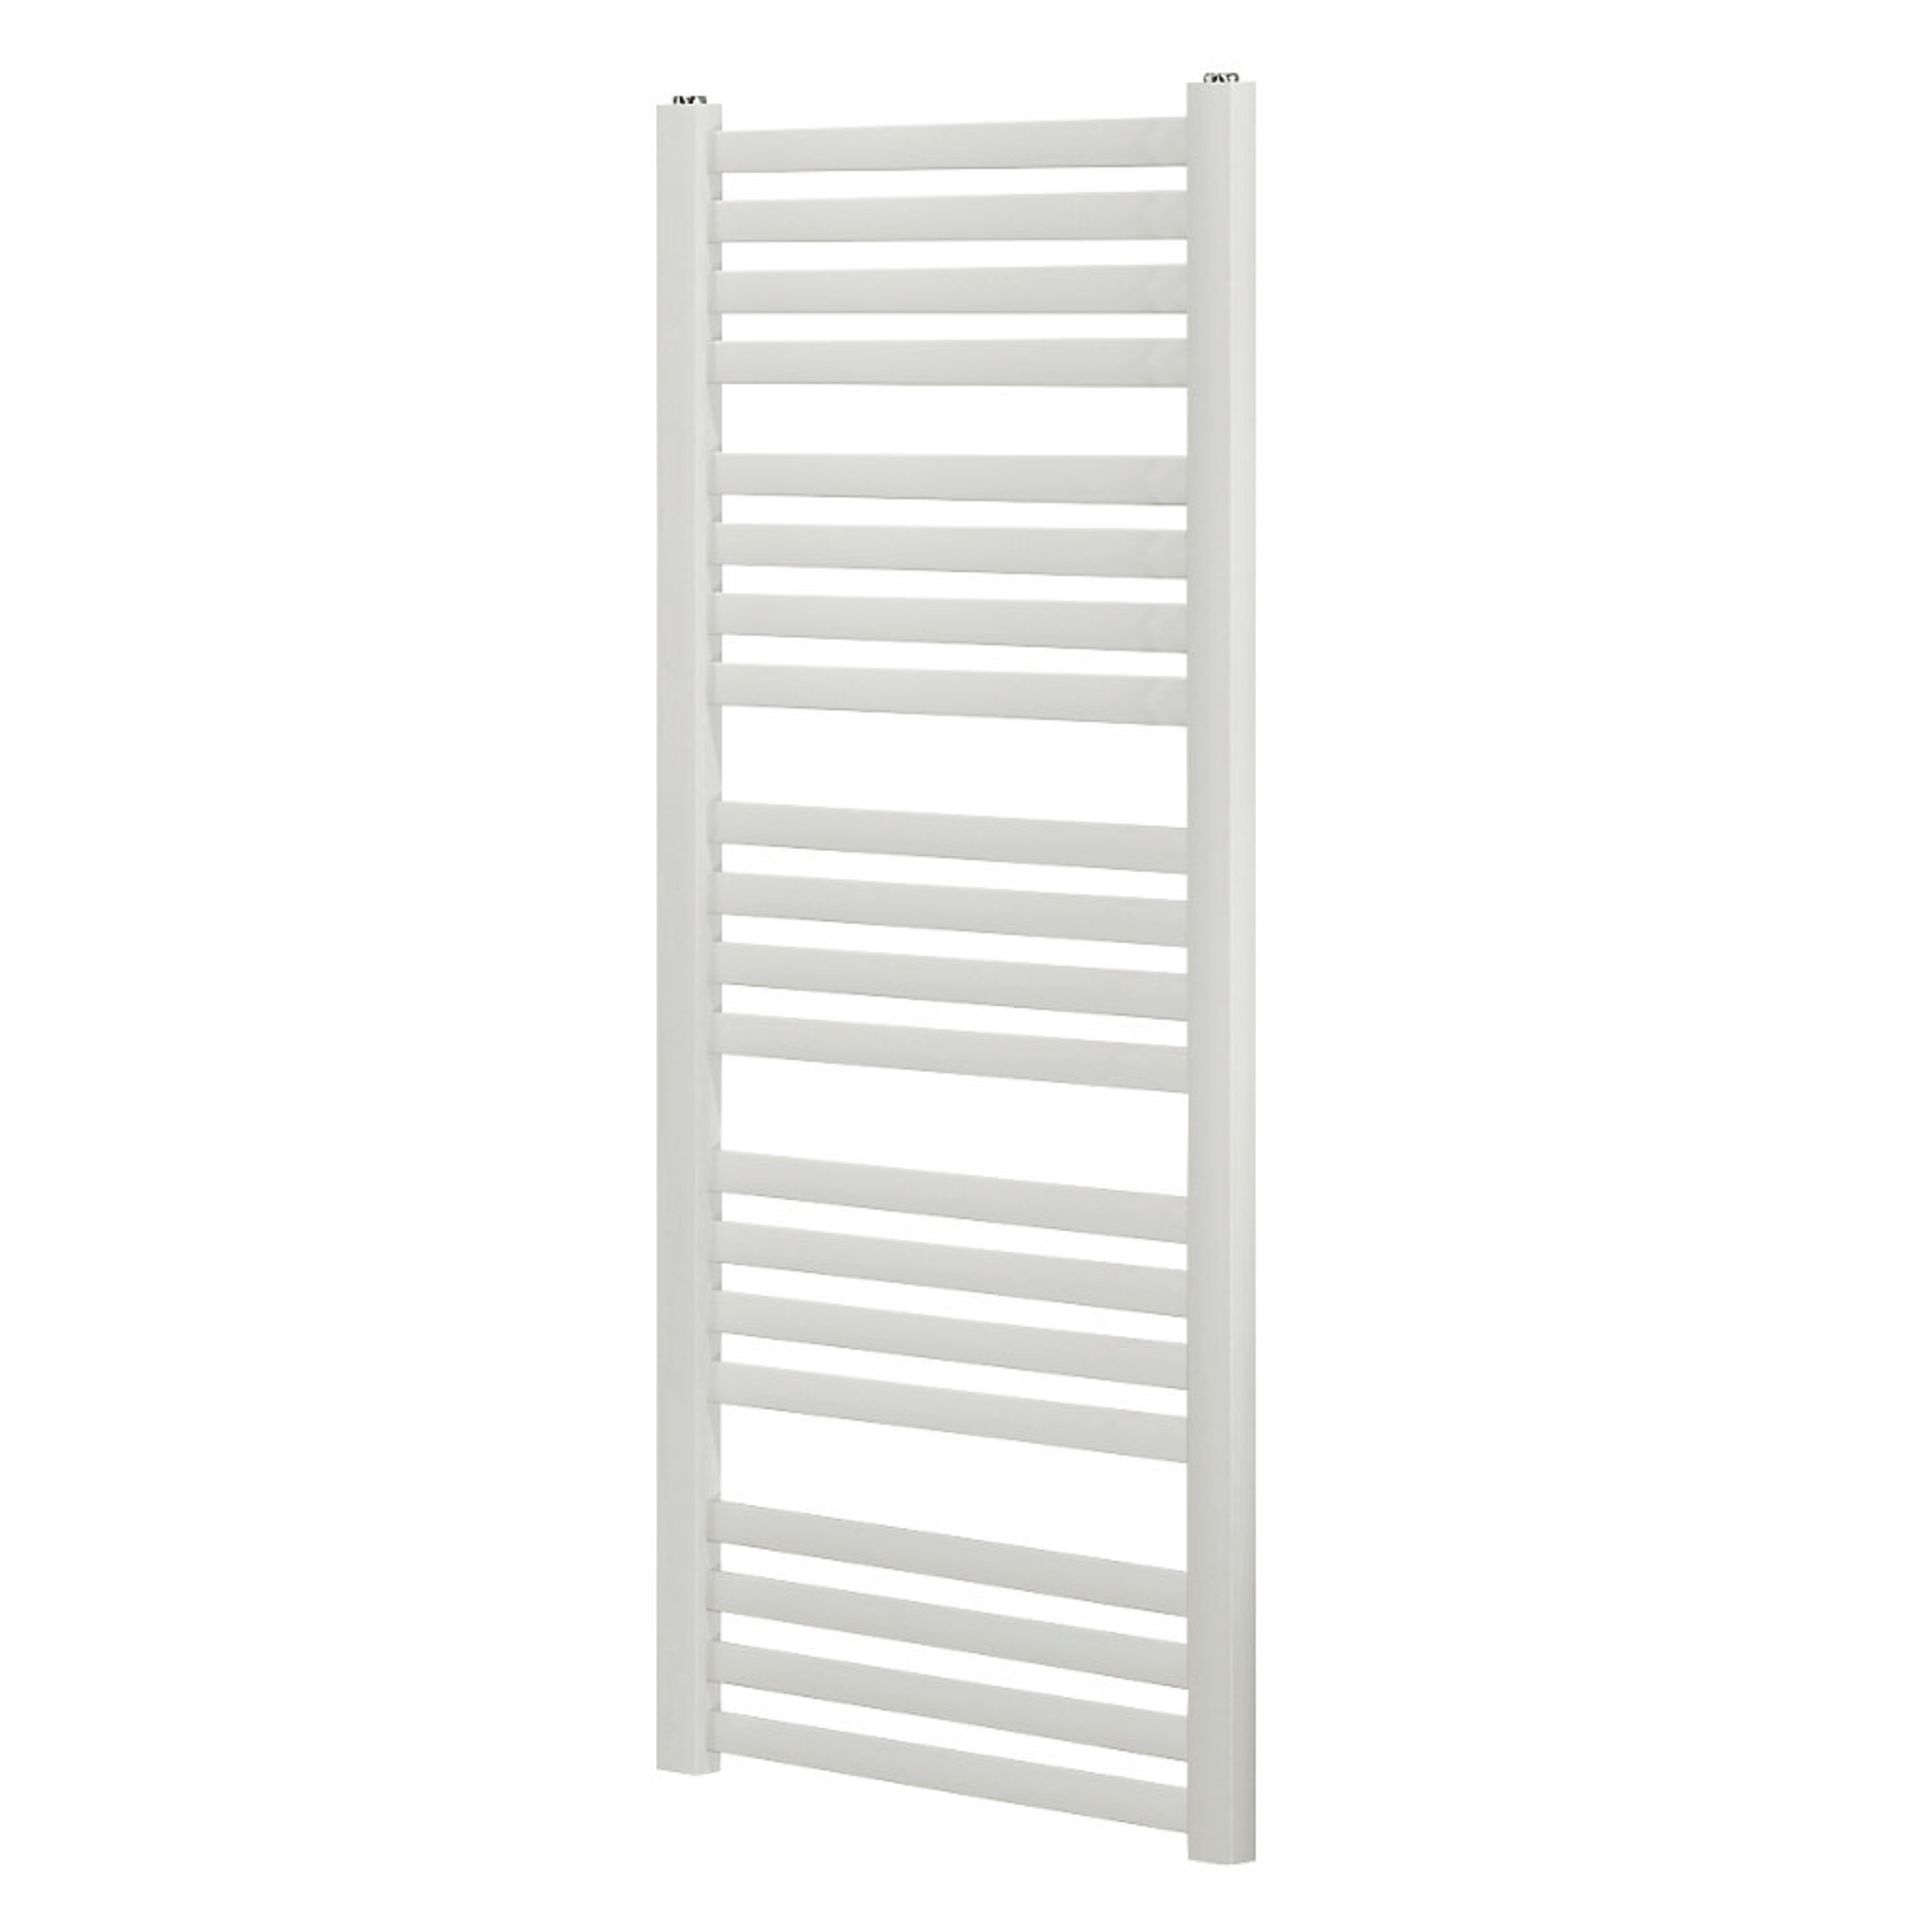 (KL118) 1200 X 450mm White Flat Towel Radiator. Powder-Coated Mild Steel Construction. May Differ - Image 2 of 2